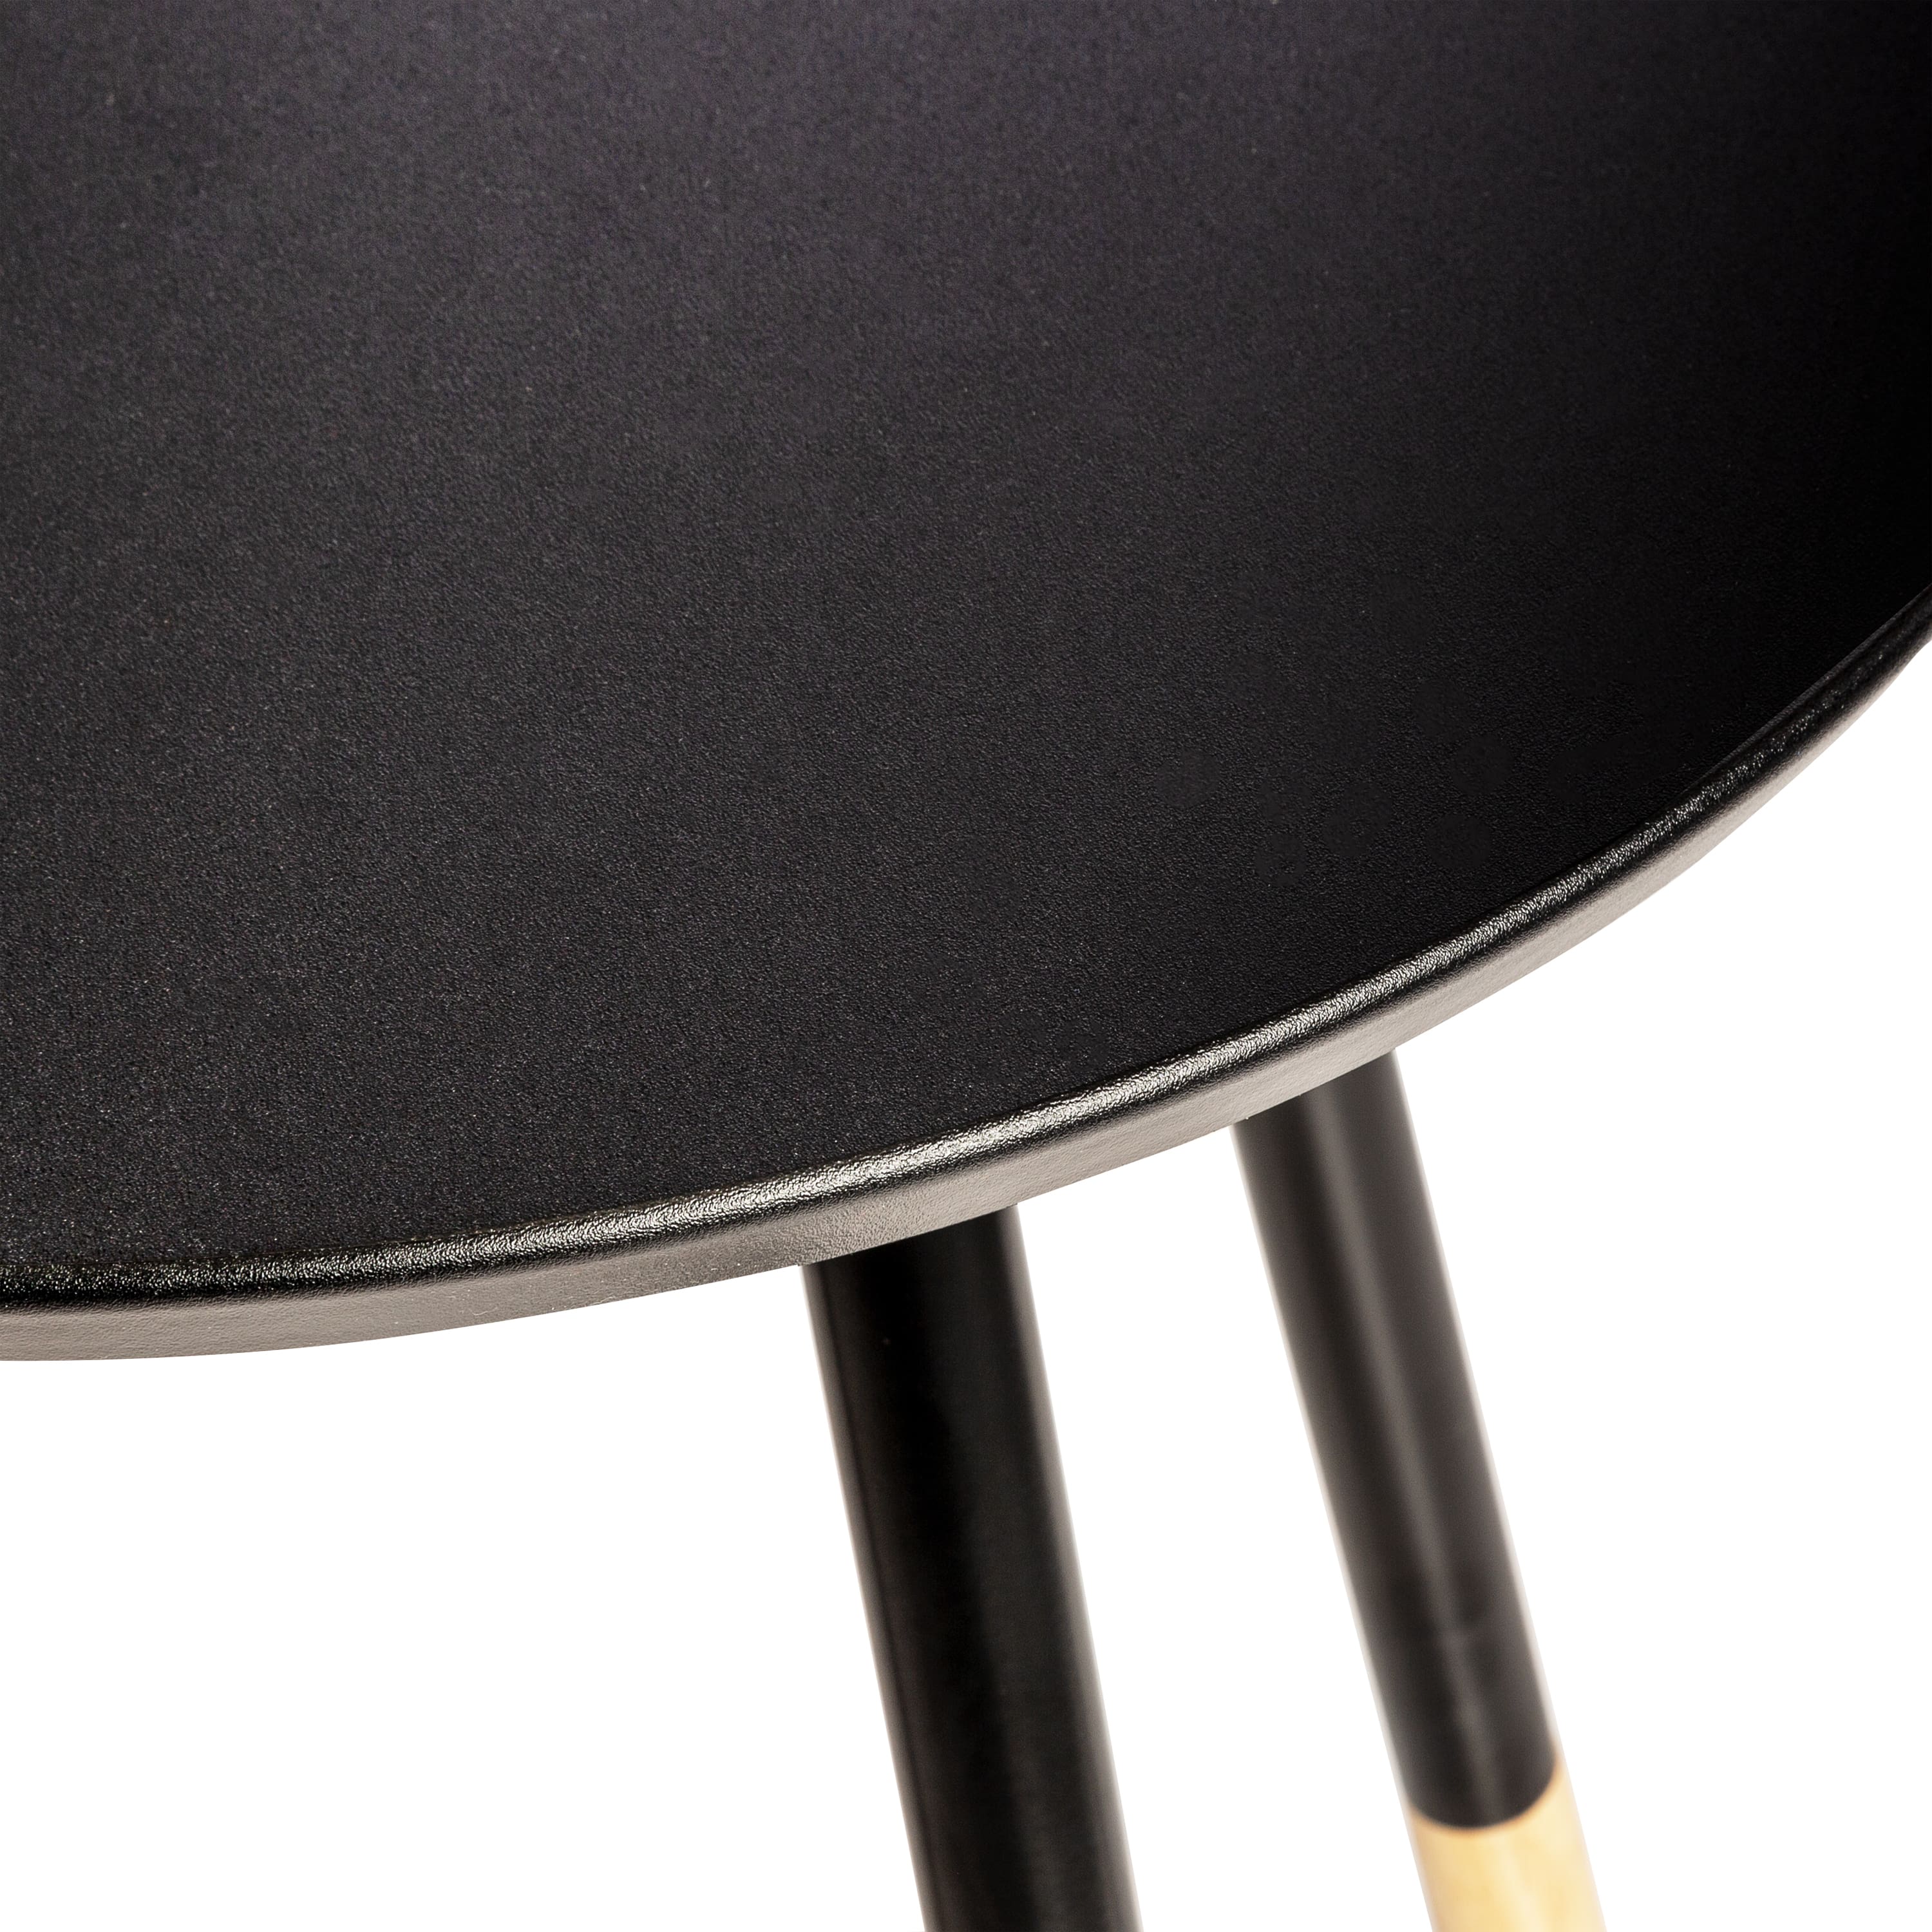 6 Pack: Honey Can Do Black Round End Table